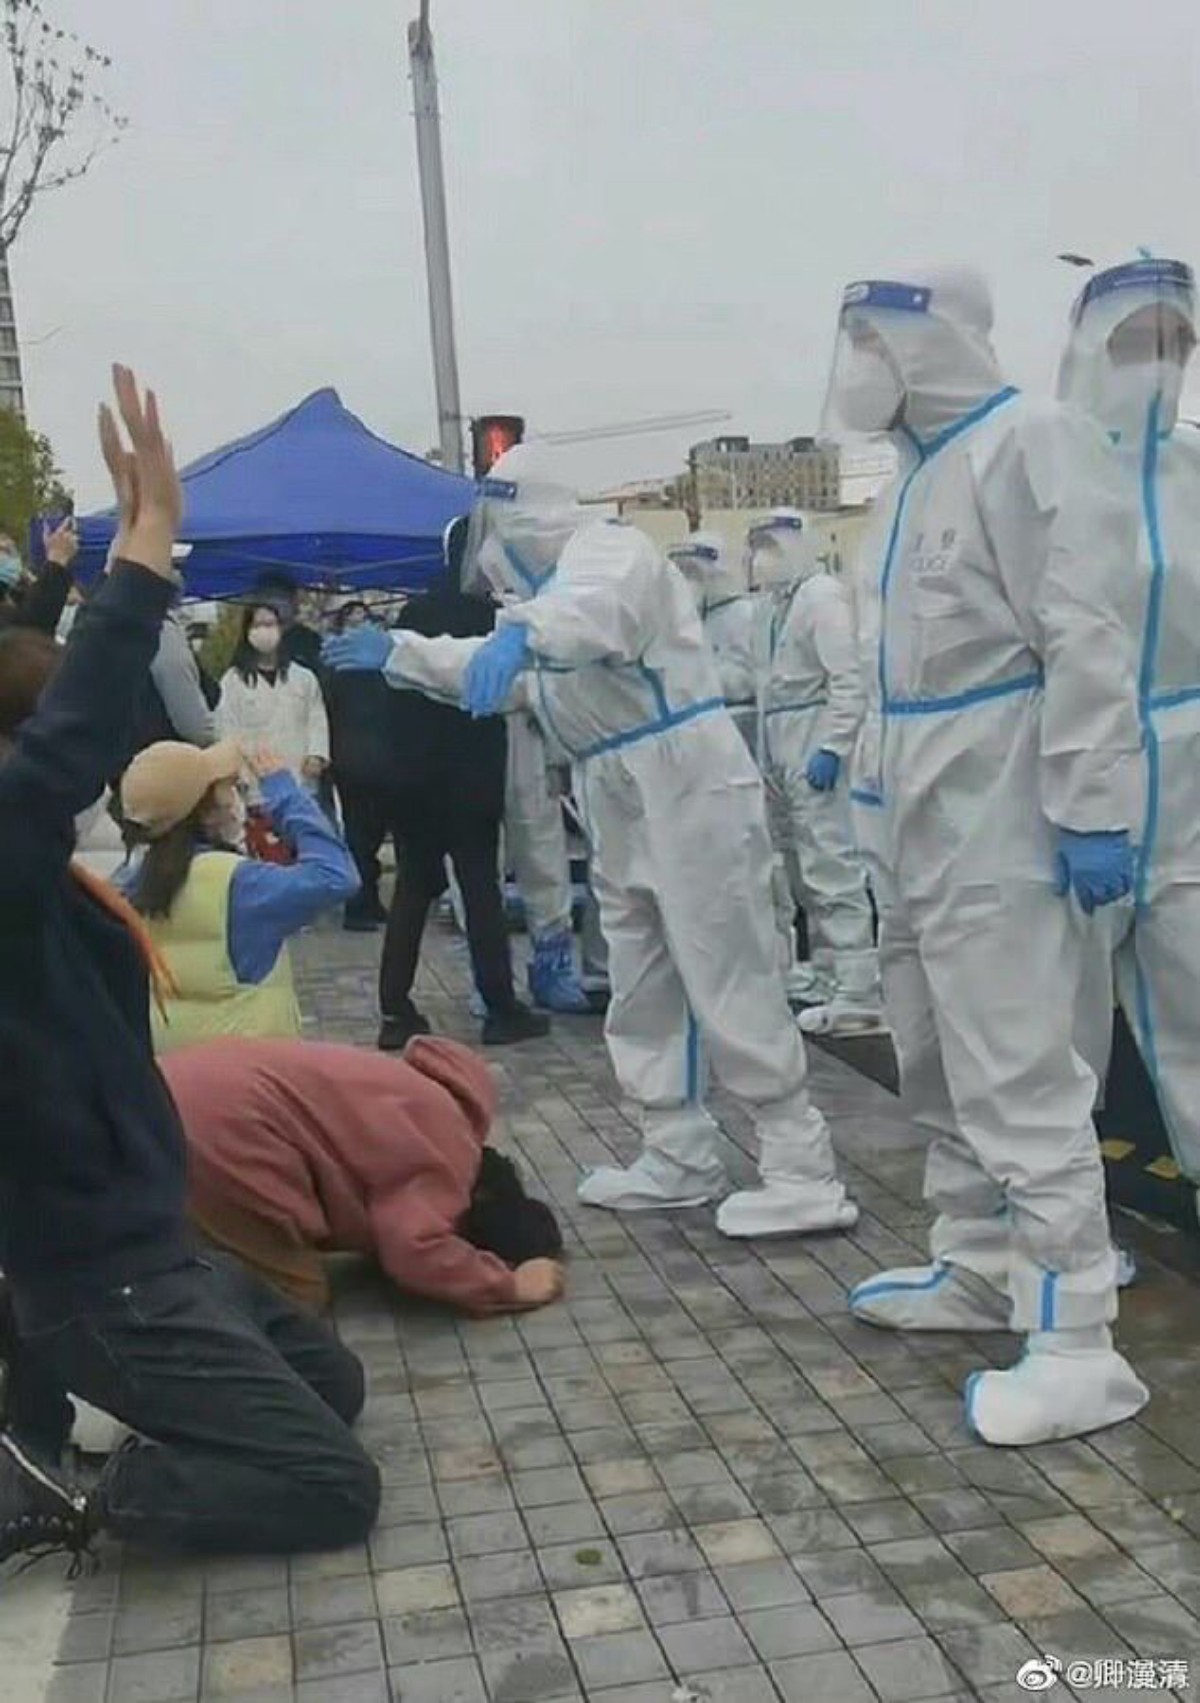 Shanghai’s Residents Attack Police After Being Evicted To Create Quarantine Centres